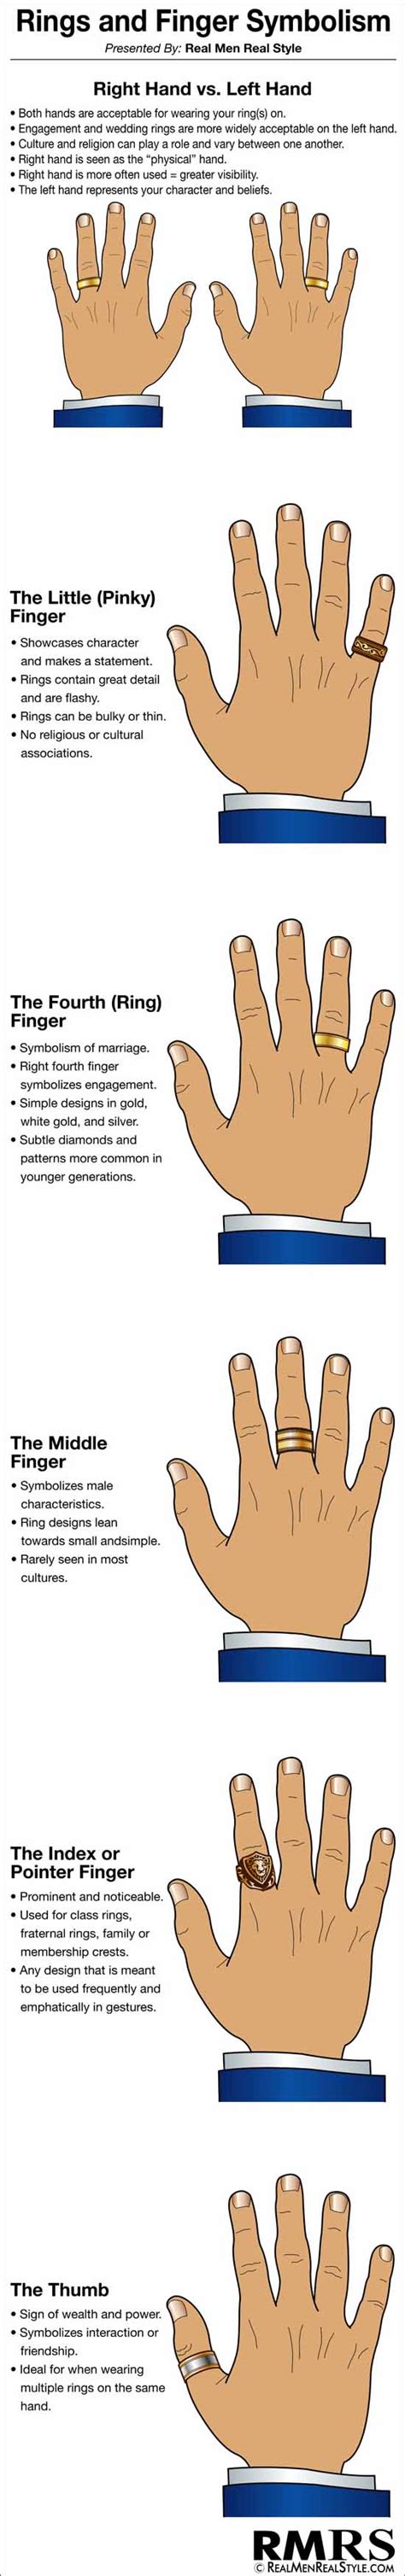 Ring Finger And Symbolism Infographic Mans Guide To Rings And Hand Jewelry